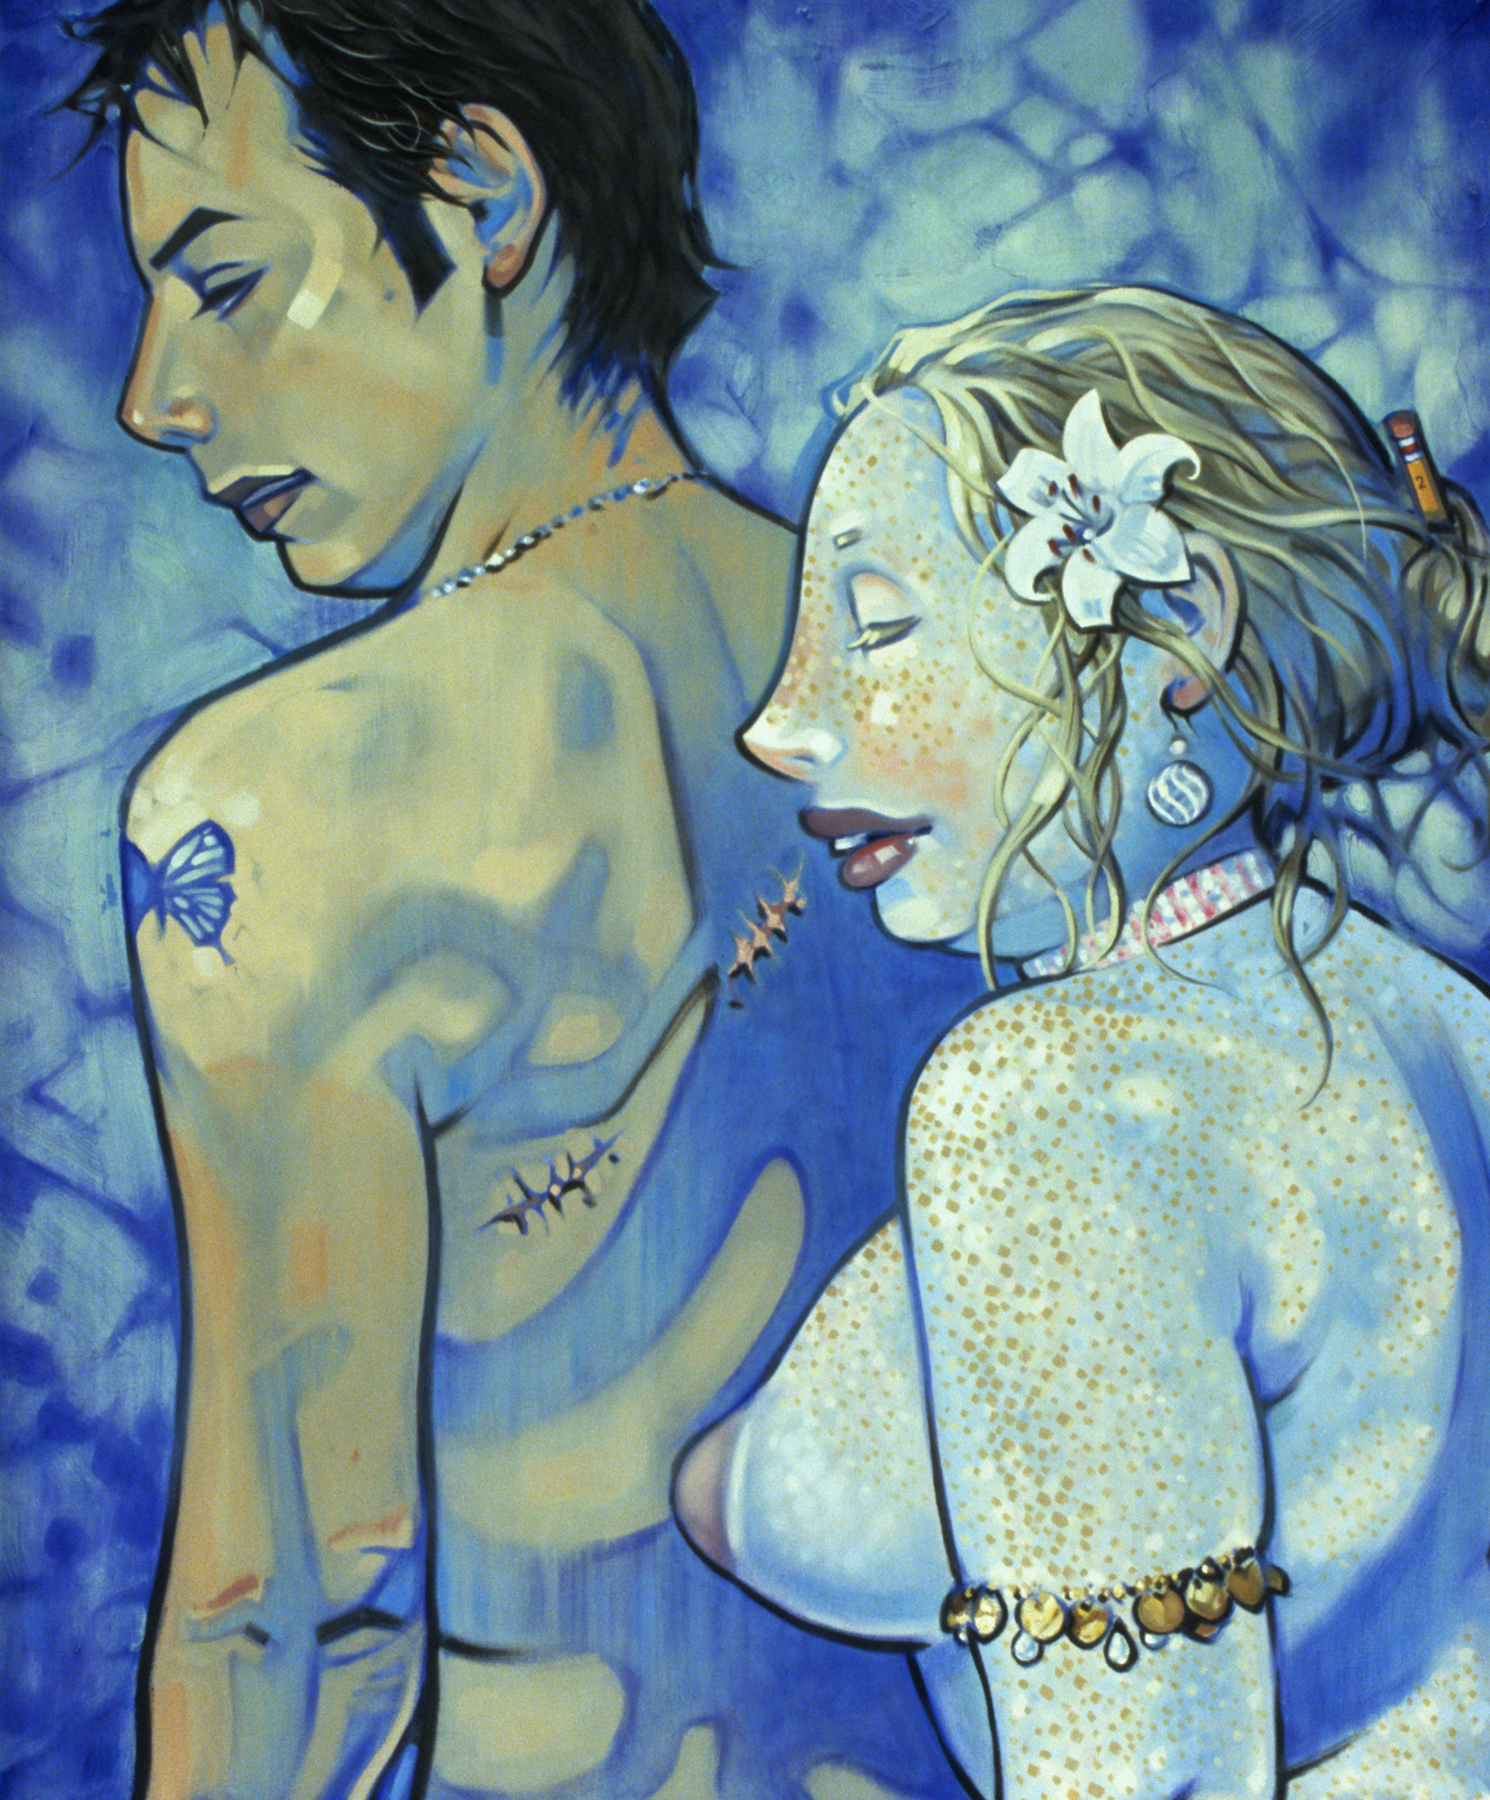 Scars, 2002, courtesy of Gary Devore, oil on canvas, 35 x 29 inches, by Taiyo la Paix